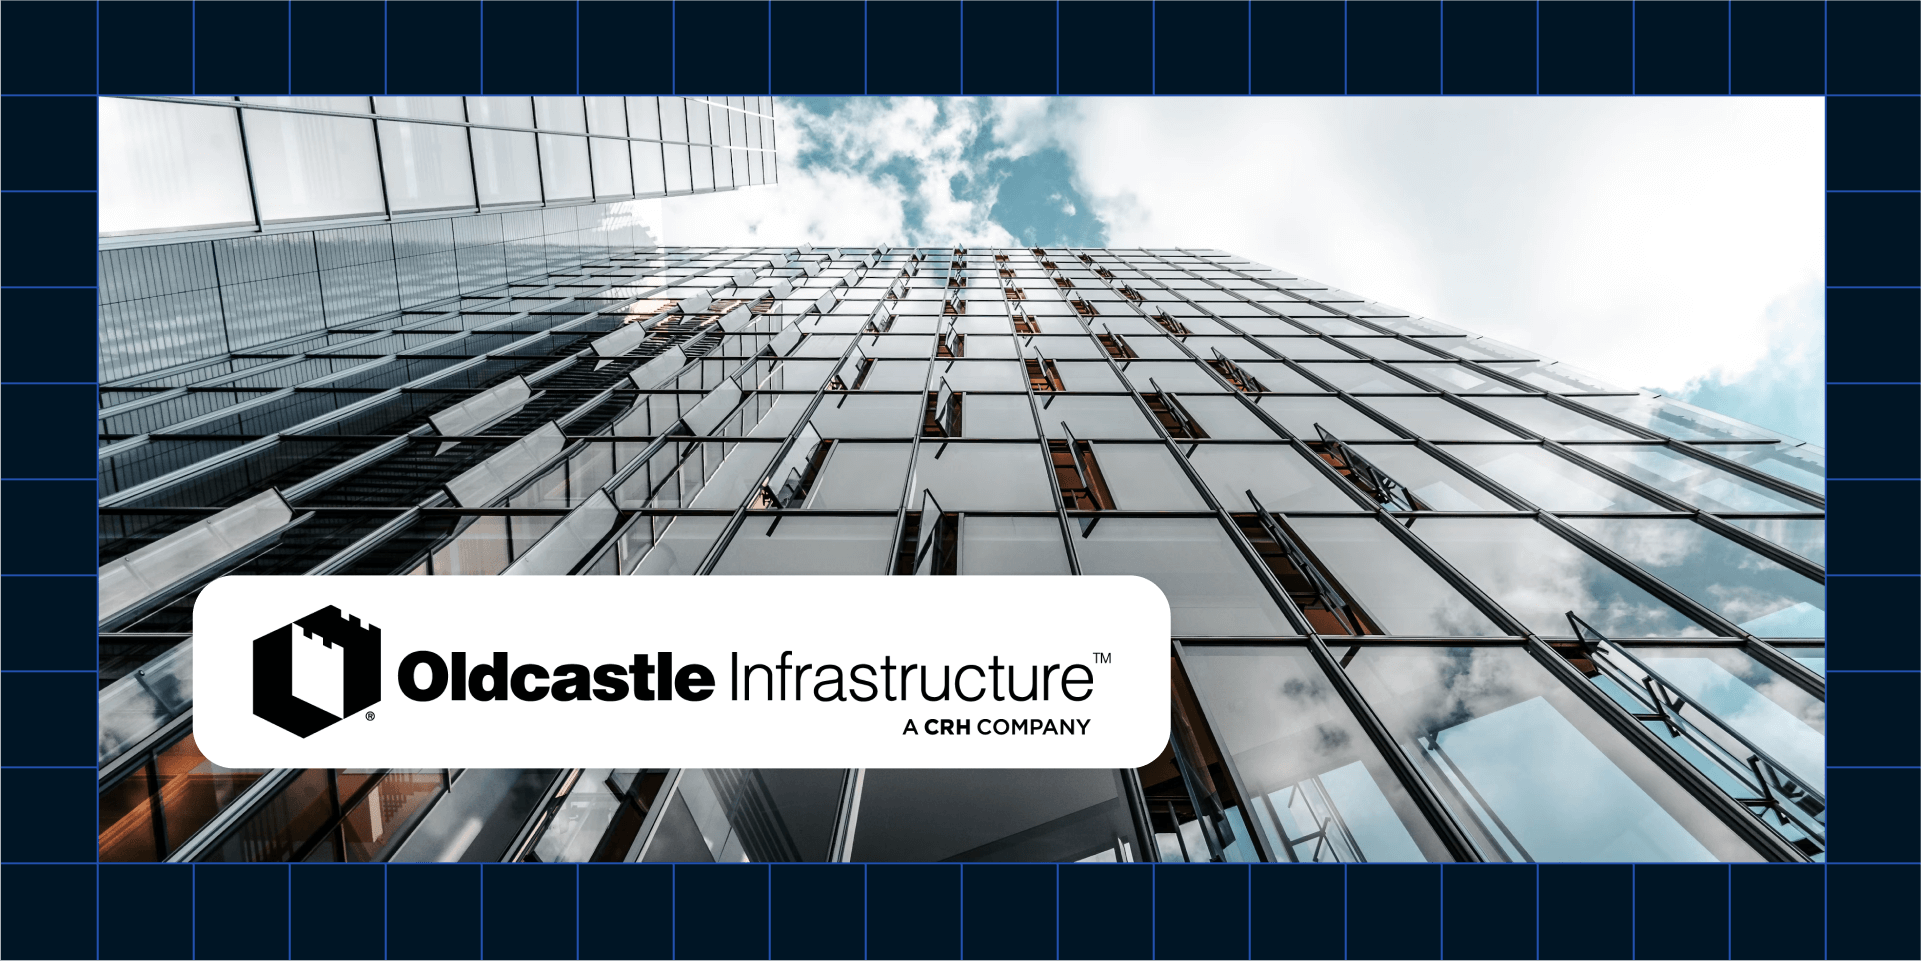 Oldcastle Infrastructure sees multiple millions of dollars in ROI with a modern data stack